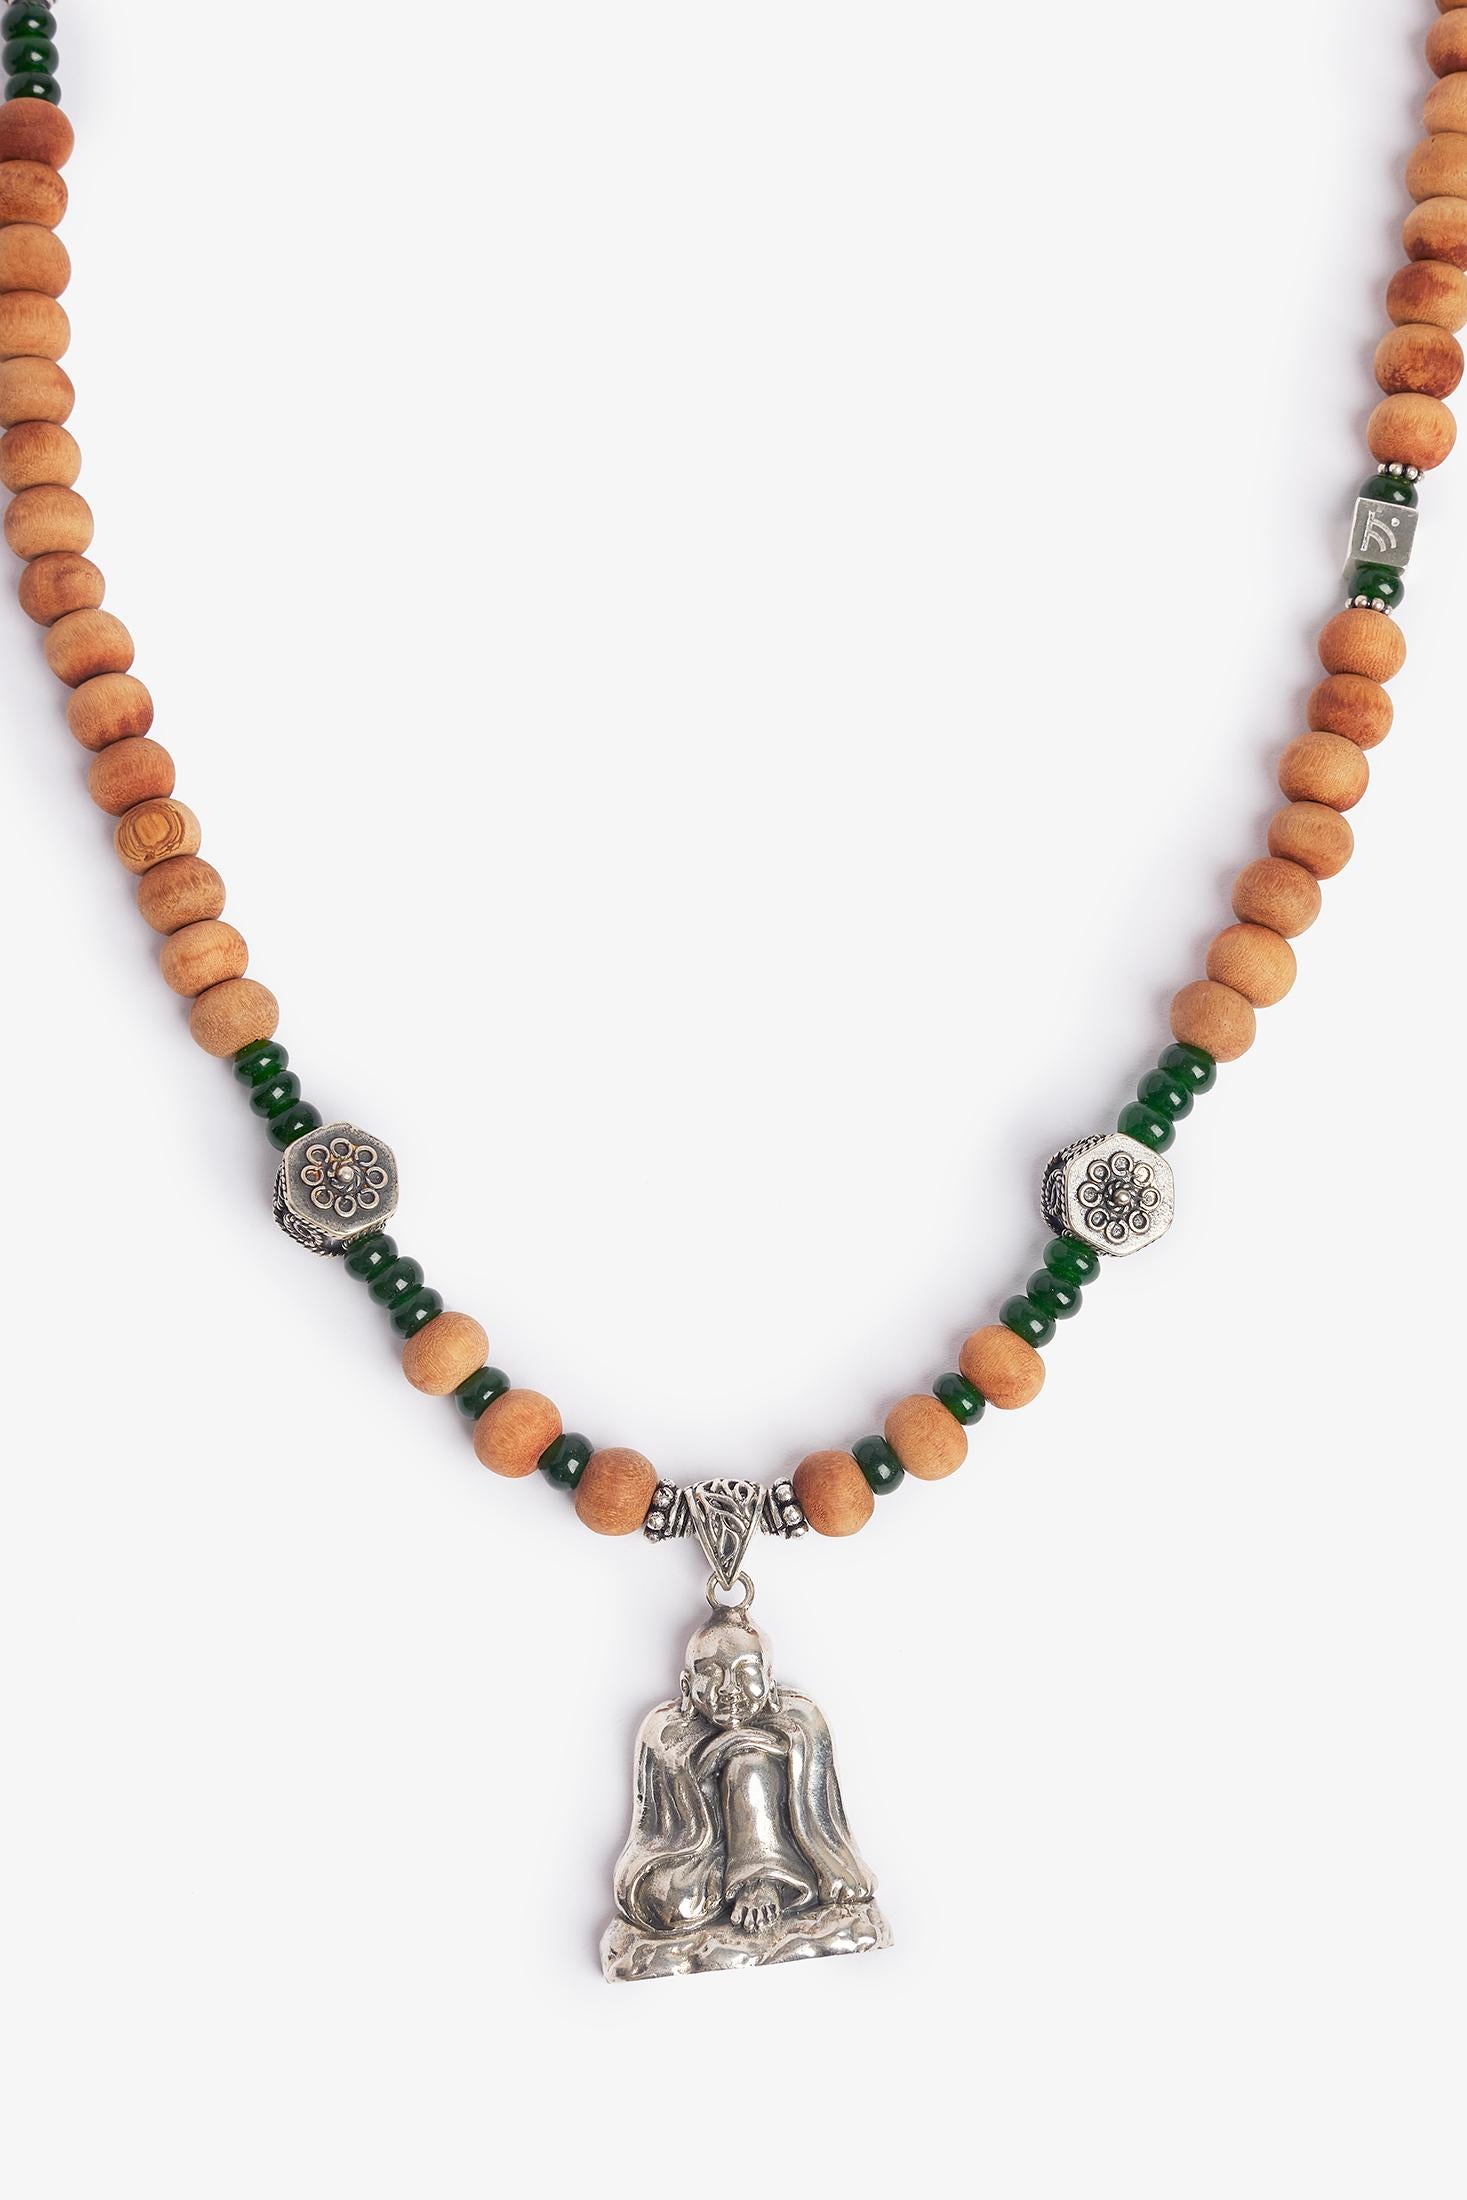 Happy buddha was made during the designer's travels to Bali.  The sandalwood was bought in a small market outside of Ubud, Bali.  The sterling silver Buddha was found in Java and the ornate silver elements are from Cheluk, Bali.  The necklace